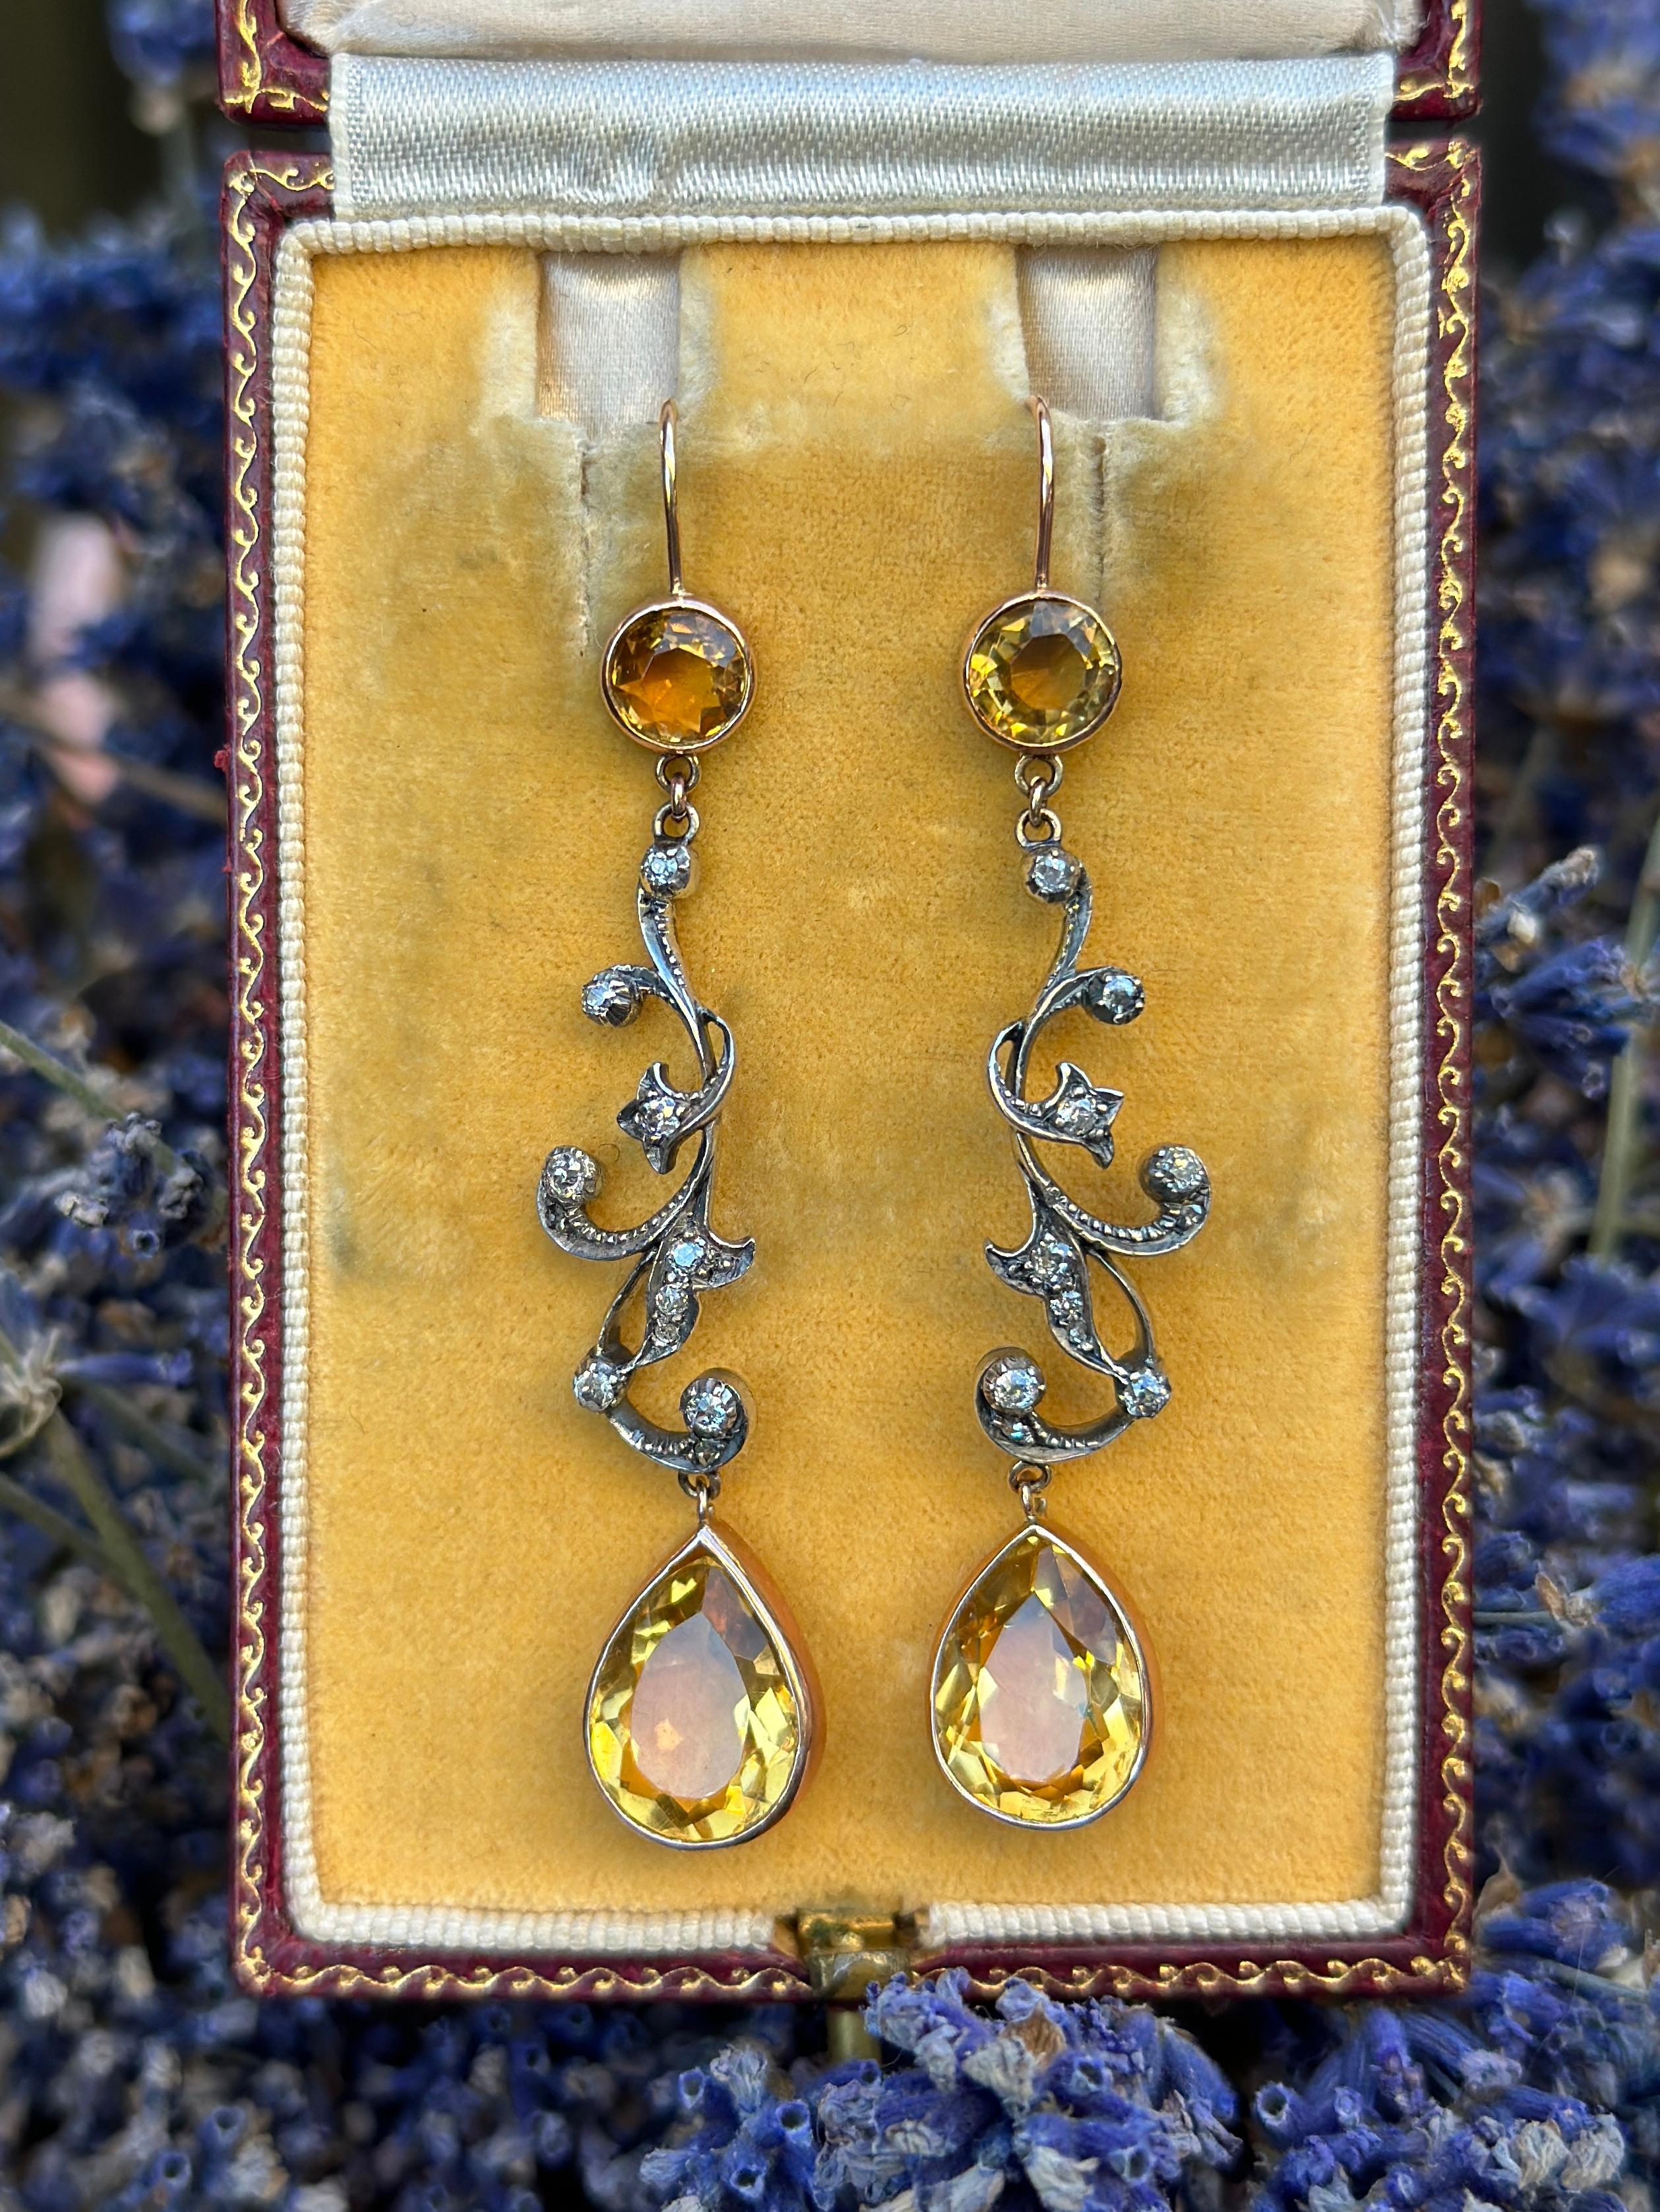 Details:
Gorgeous Edwardian Belle Epoque earrings with Citrines, diamonds, 14K rose gold and silver! What is not to love, would look great for work, or an evening out! So great you might use these as your favorite everyday earrings! No hallmarks are